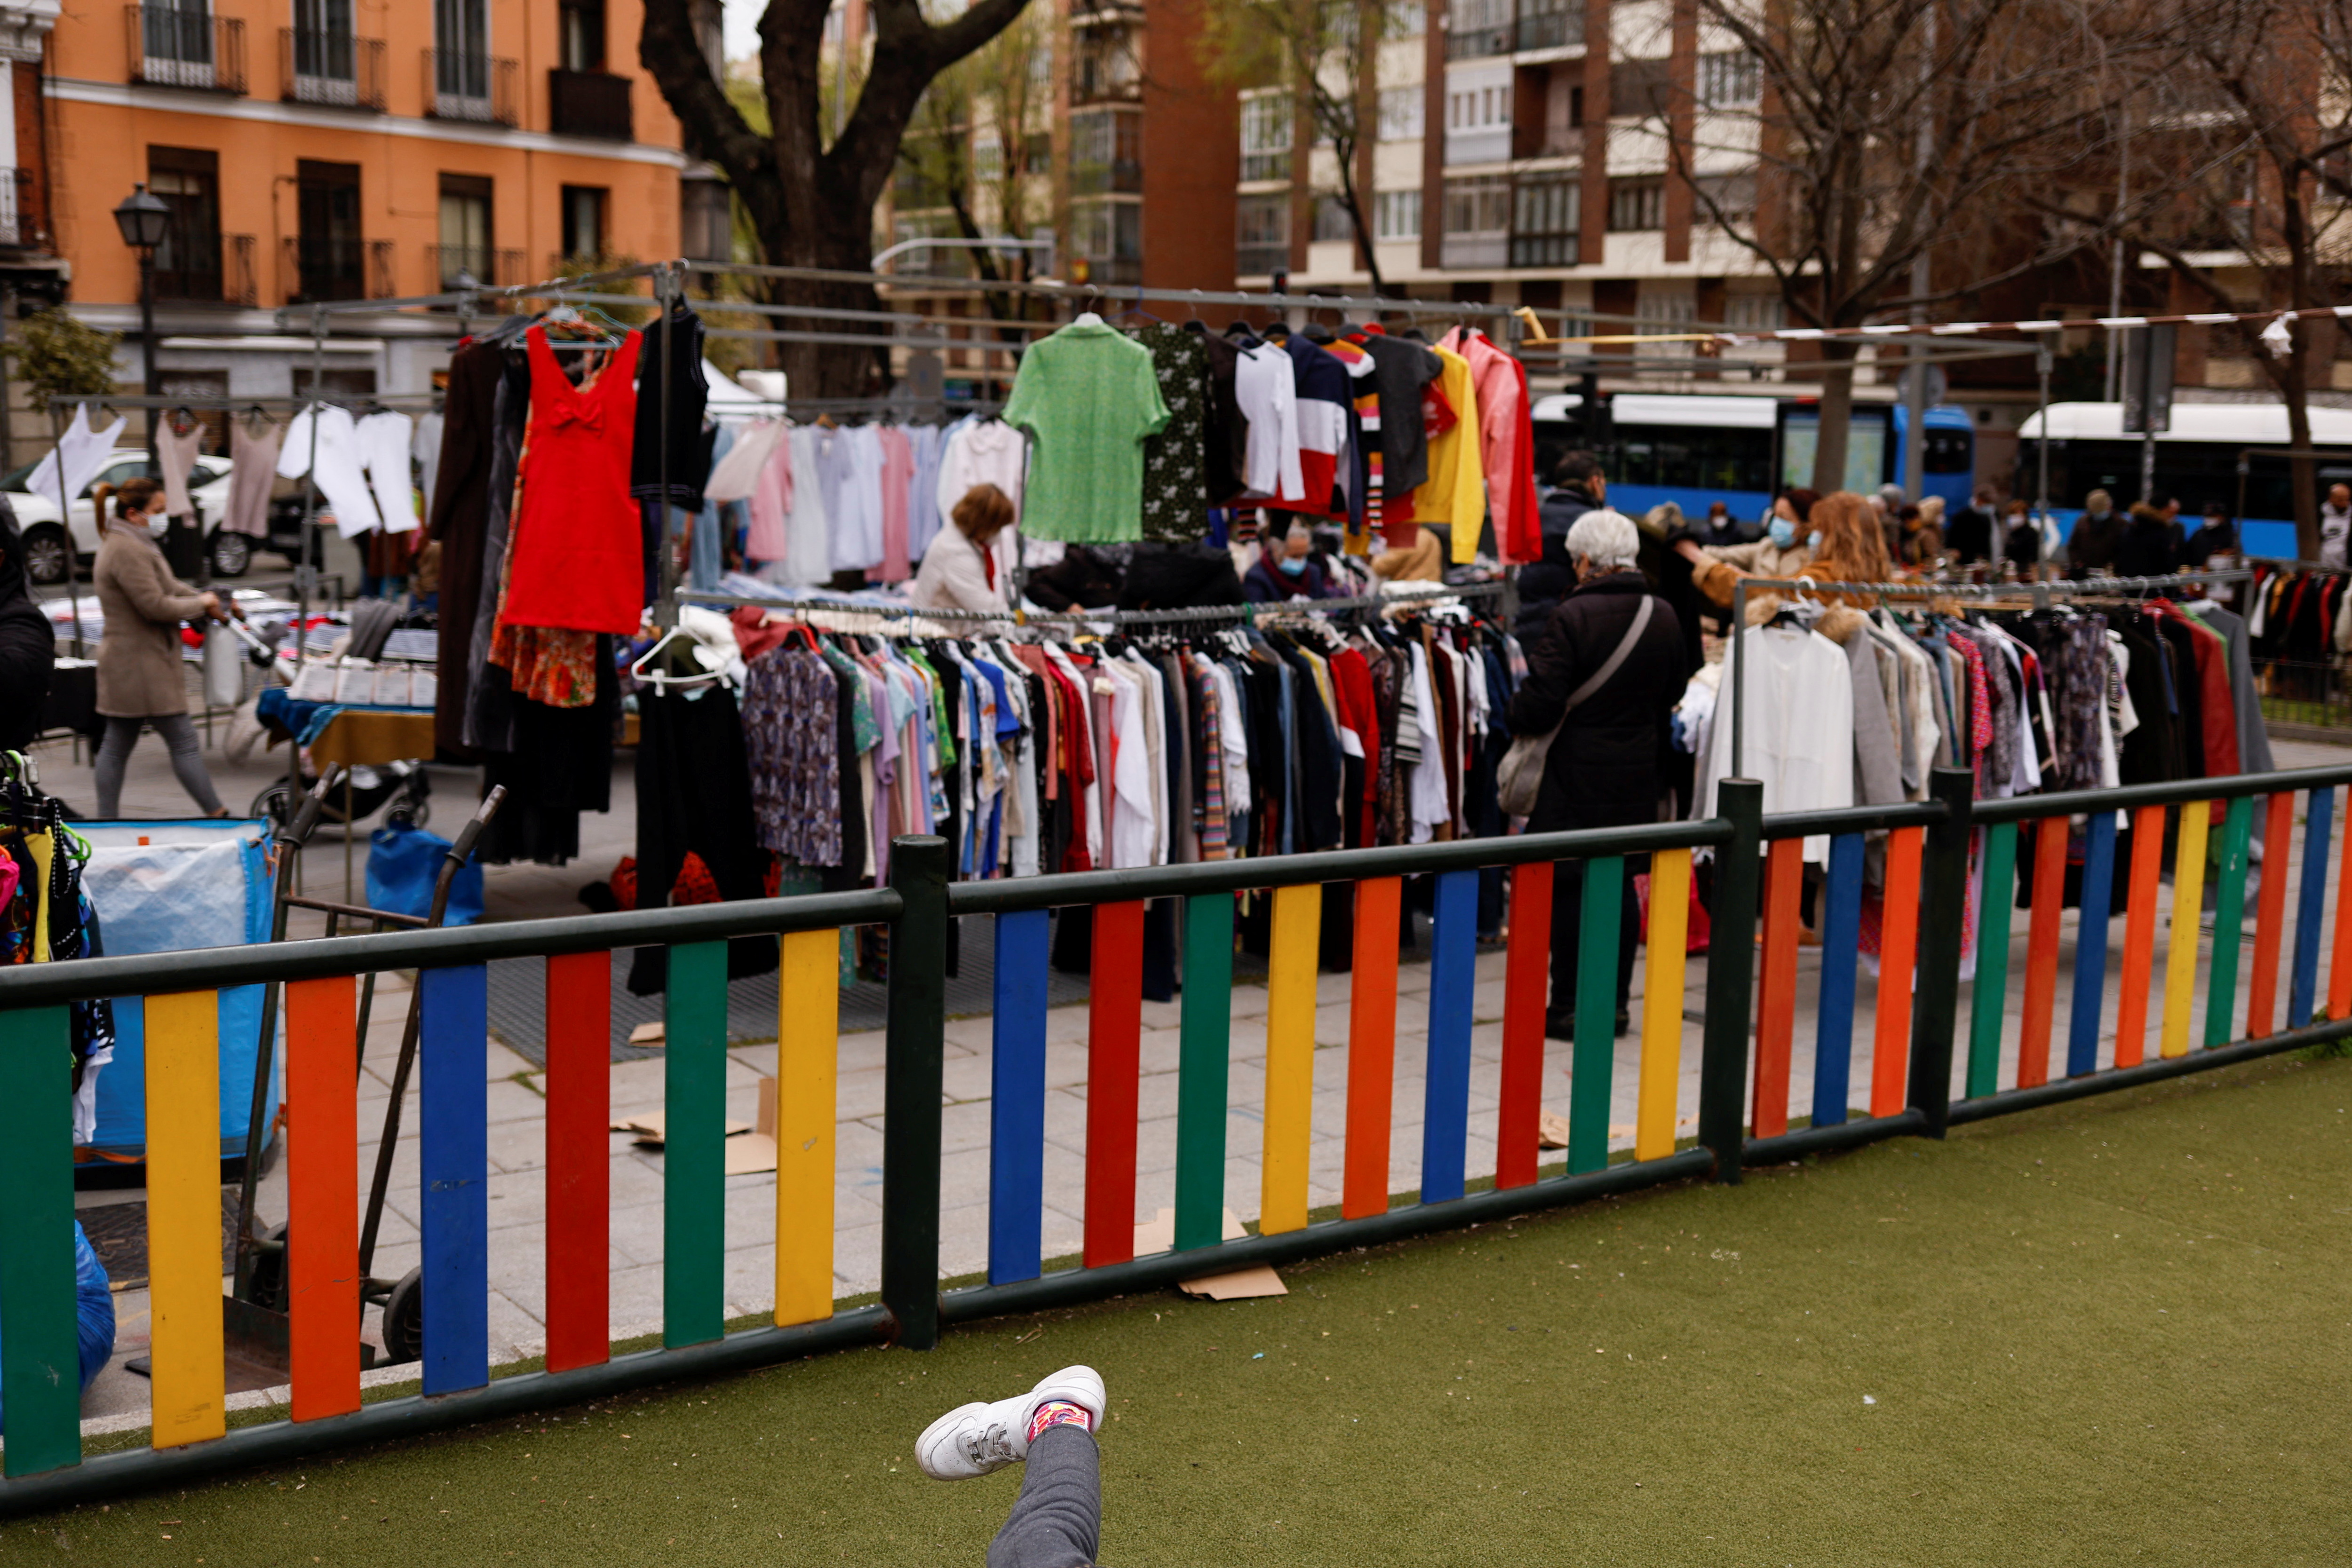 A child plays at a playground as people shop at a street market in Madrid